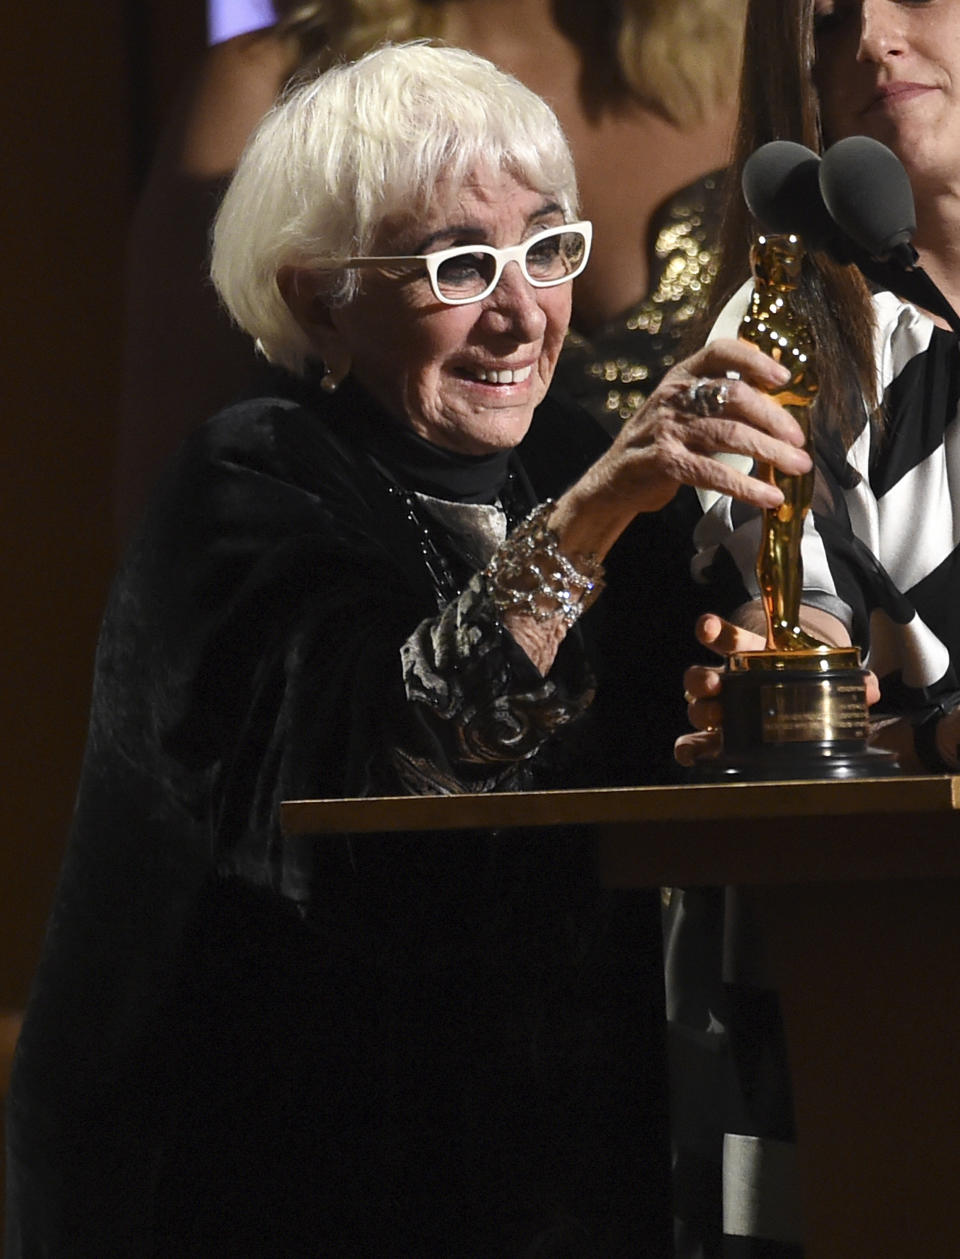 FILE - Lina Wertmueller accepts her honorary award at the Governors Awards on Sunday, Oct. 27, 2019, at the Dolby Ballroom in Los Angeles. Italian director Lina Wertmueller, the first woman to receive an Oscar nomination for directing, has died, news reports and the Italian Culture Ministry said Thursday Dec. 9, 2021. She was 93. (Photo by Chris Pizzello/Invision/AP, File)